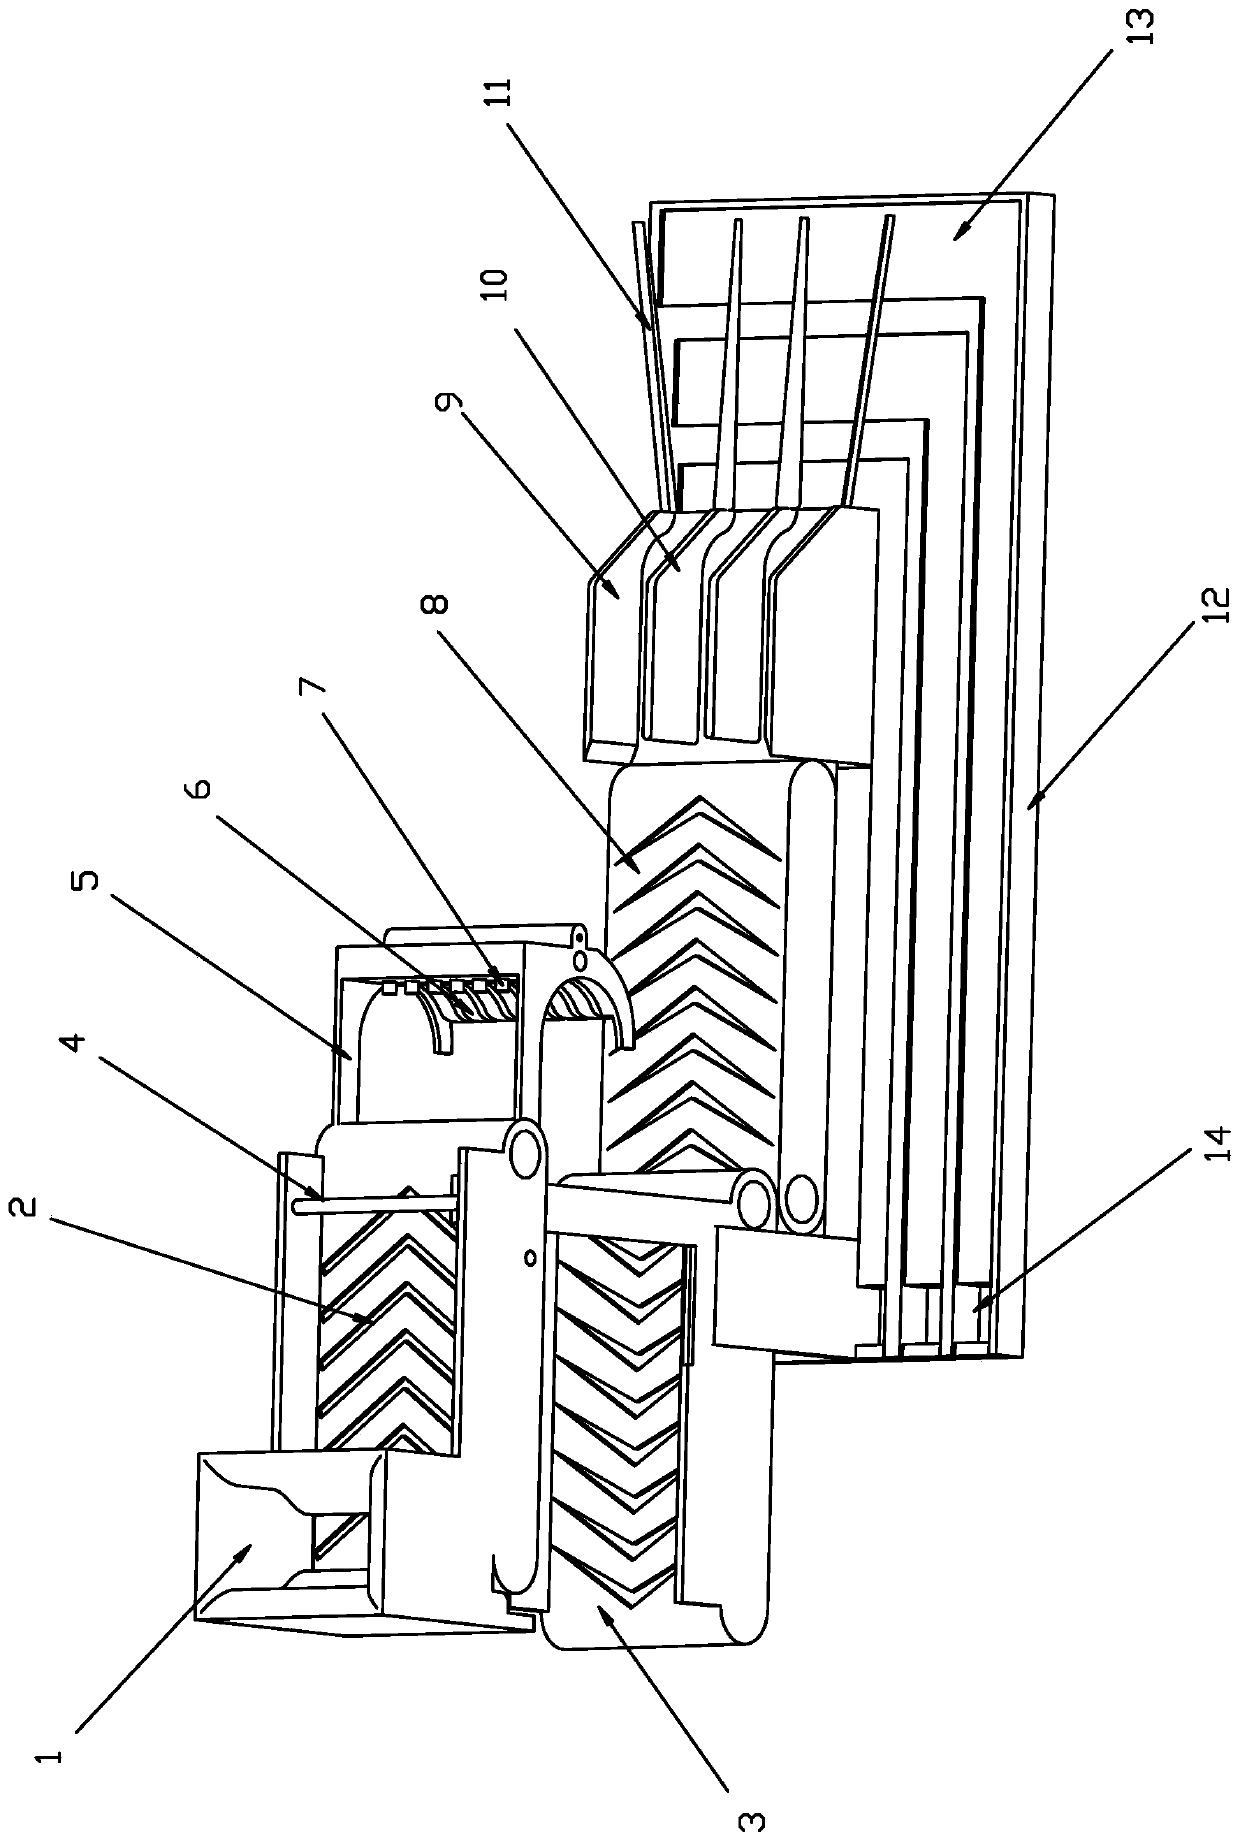 Fruit and vegetable sorting device